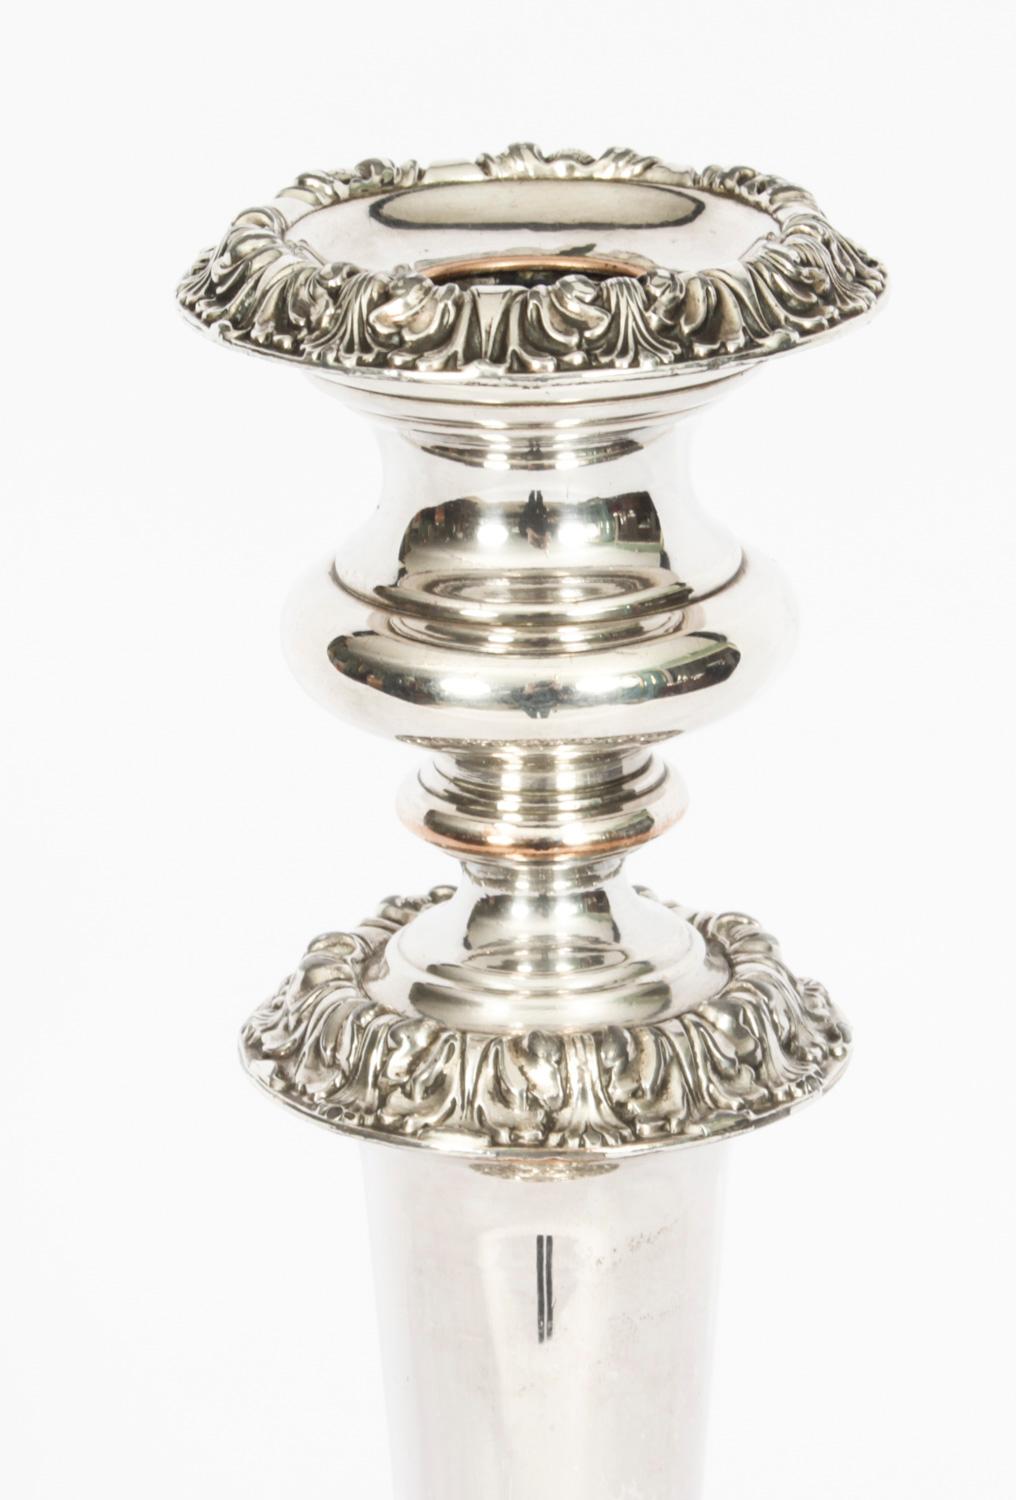 Sheffield Plate Antique Set 4 Old Sheffield Silver Plated Candlesticks 19th Century